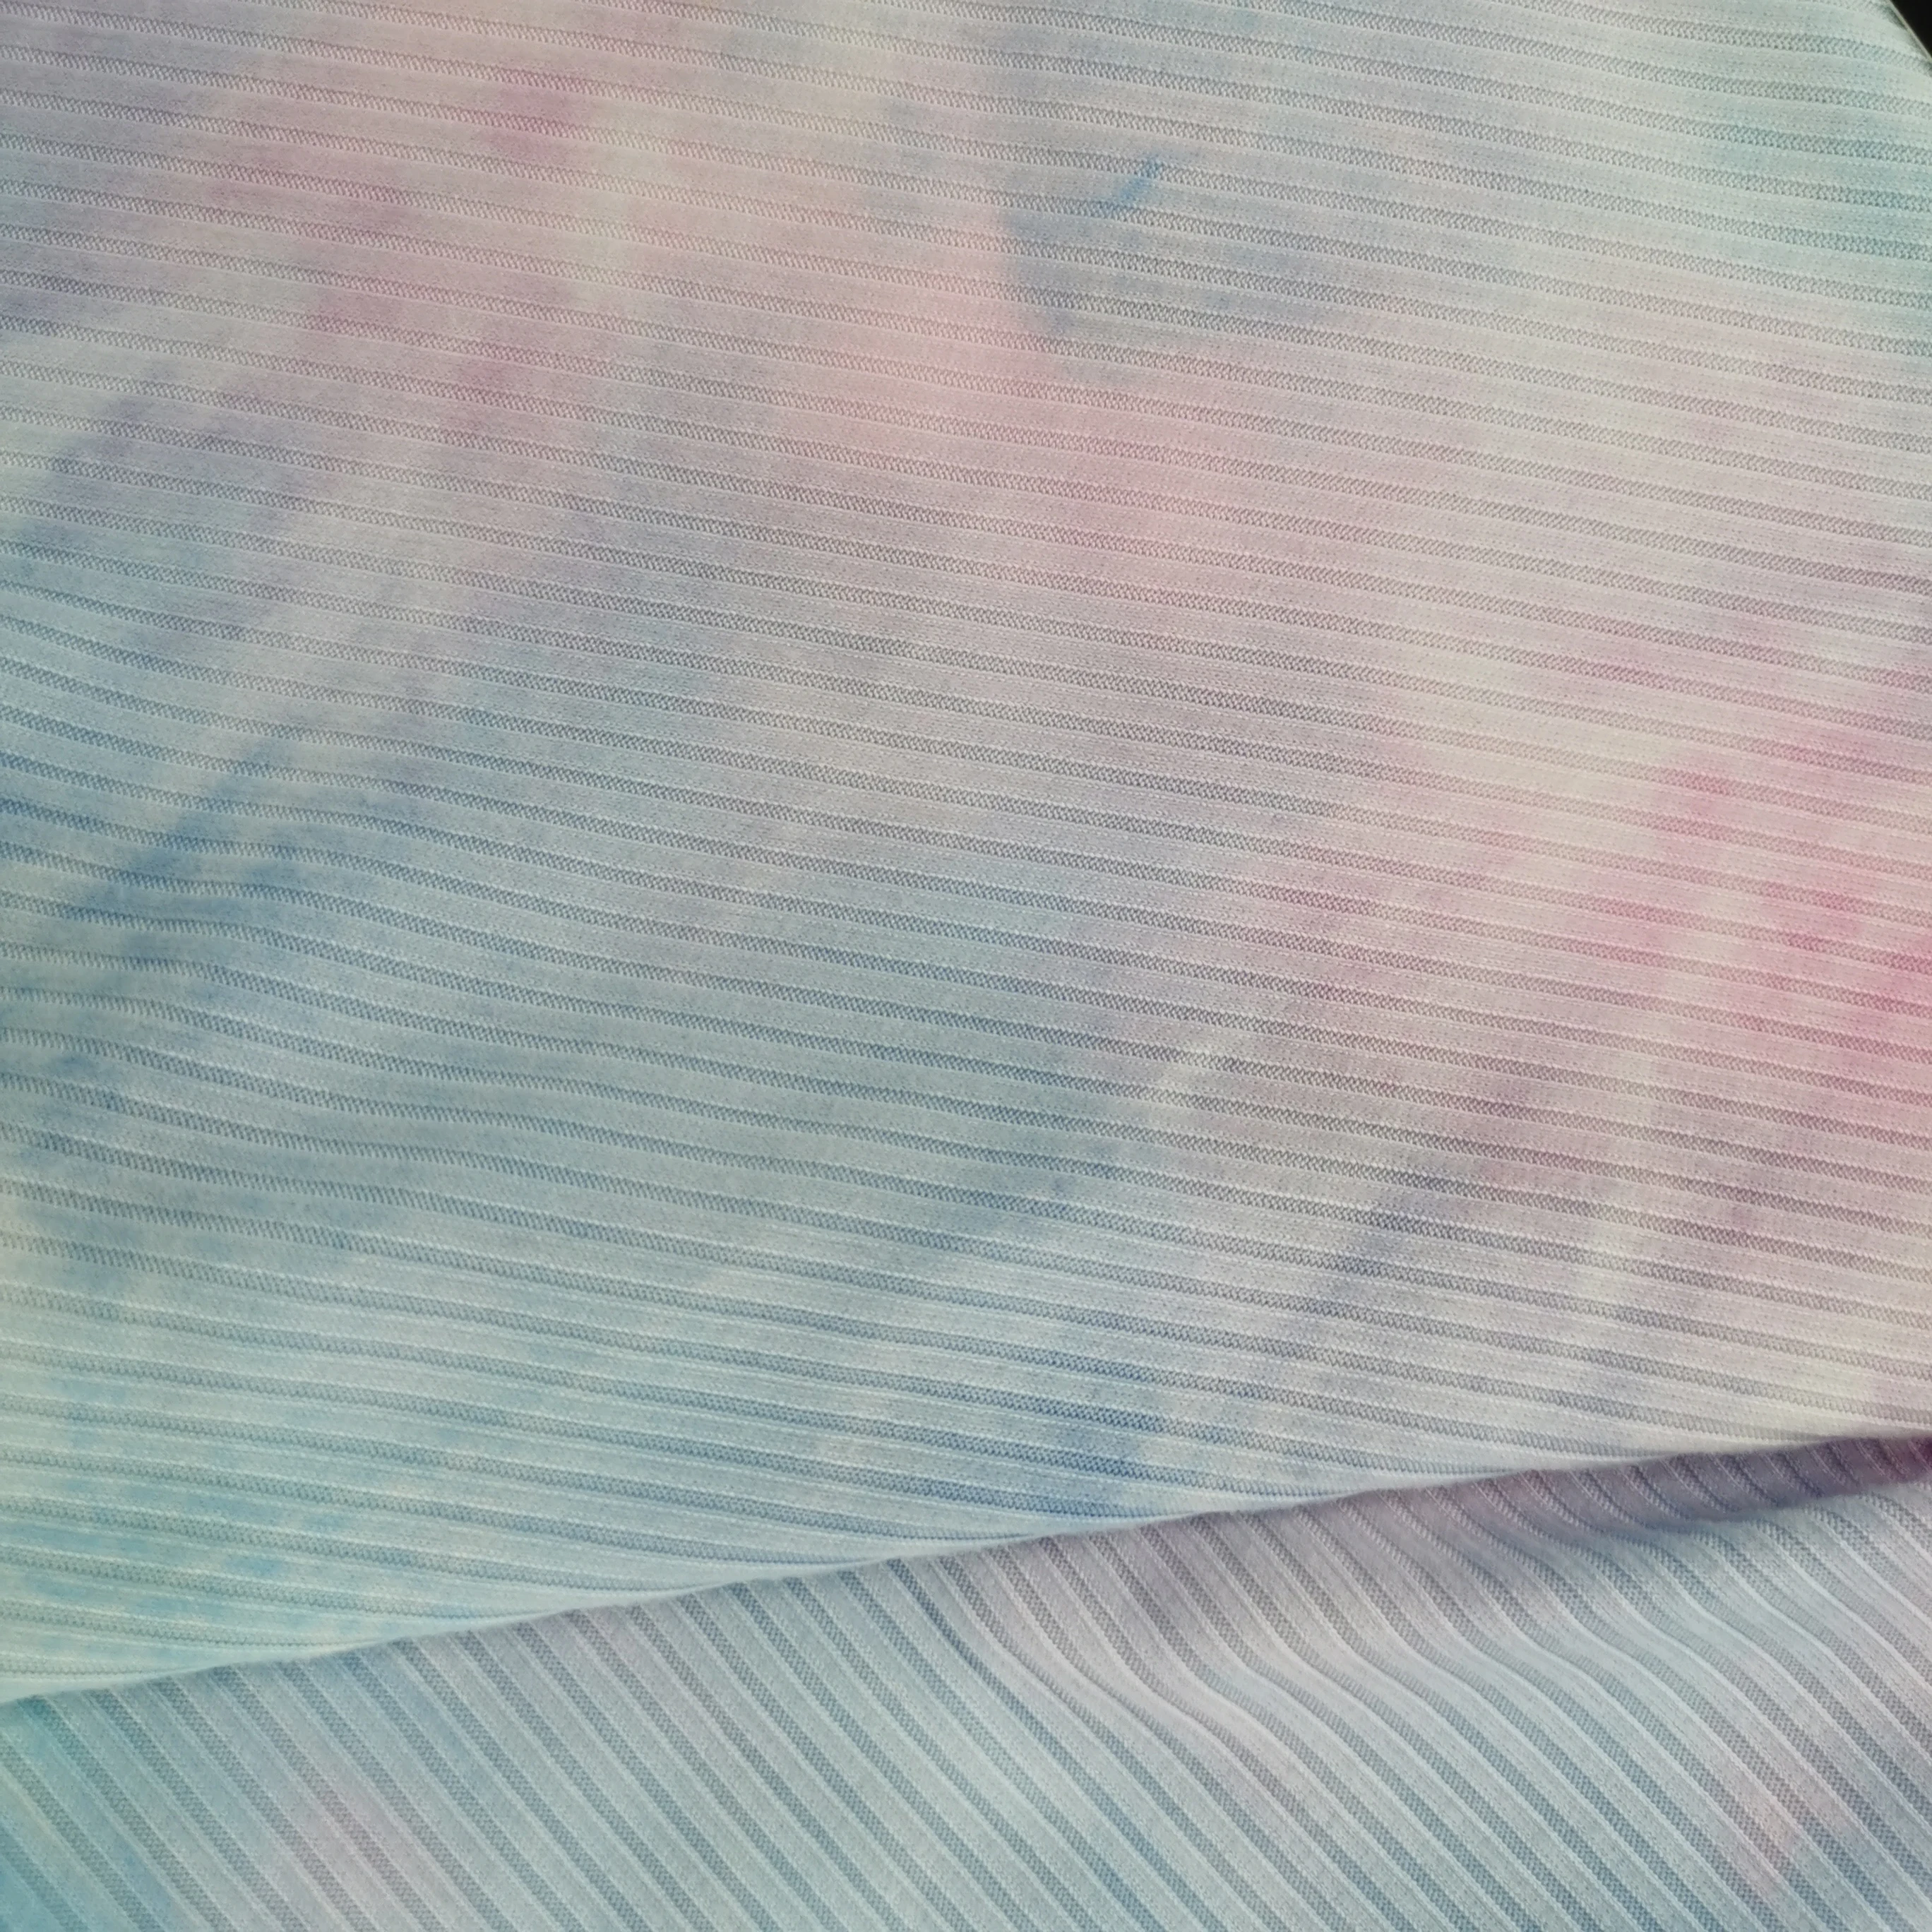 Hot selling tie-dye fabric single jersey 4*2 rib 100% polyester knit fabric for women cloth